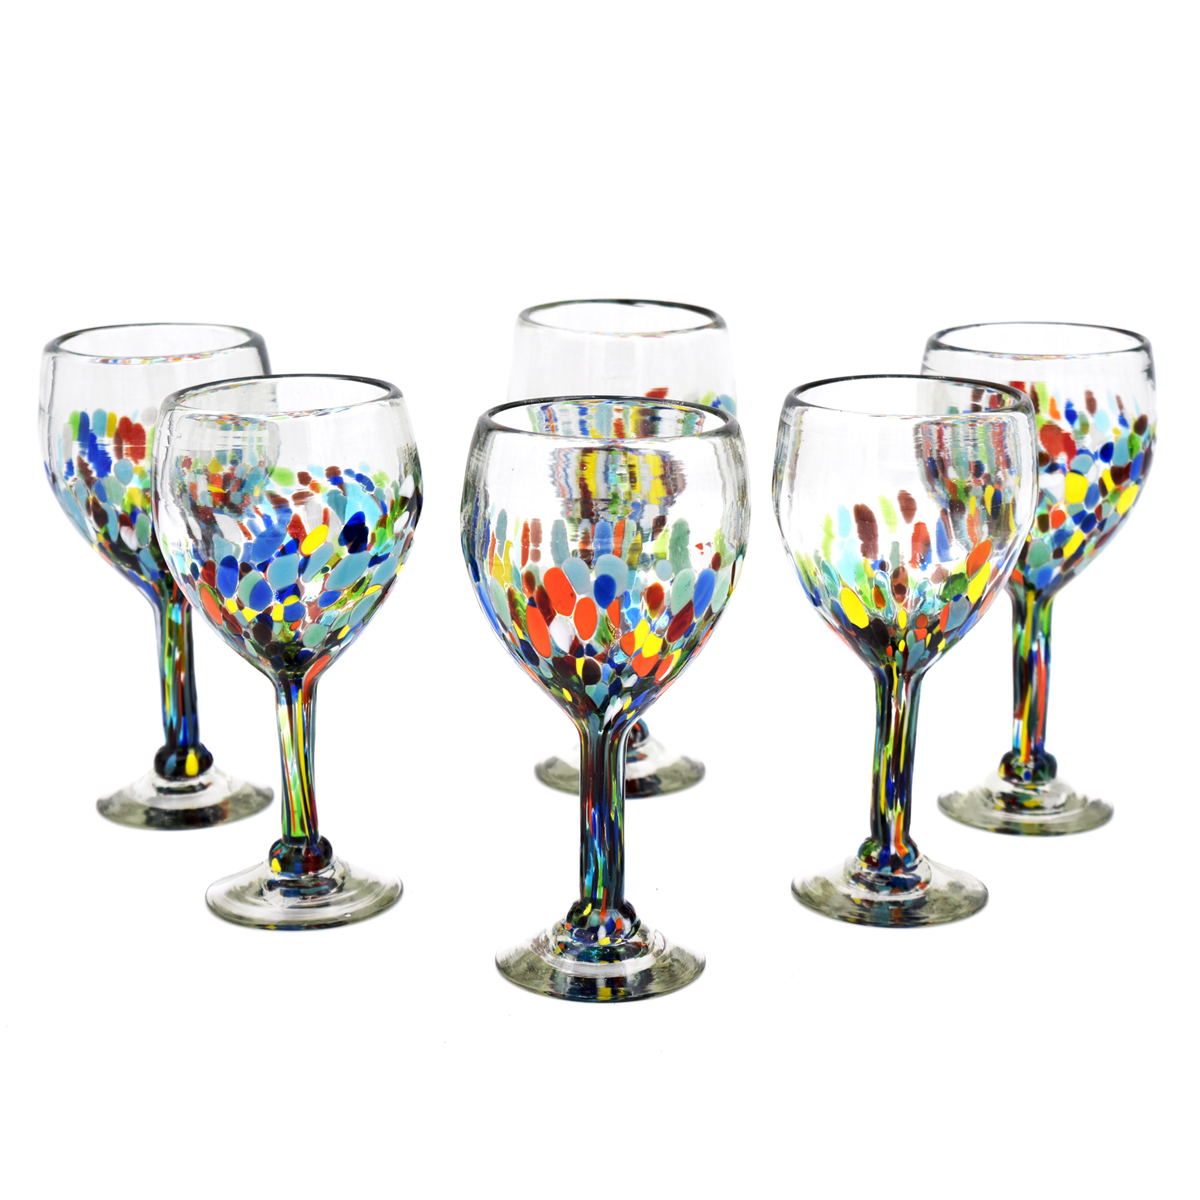 Artisan Crafted | Wine Glass | Hand-Blown "Confetti Festival" Set of 6